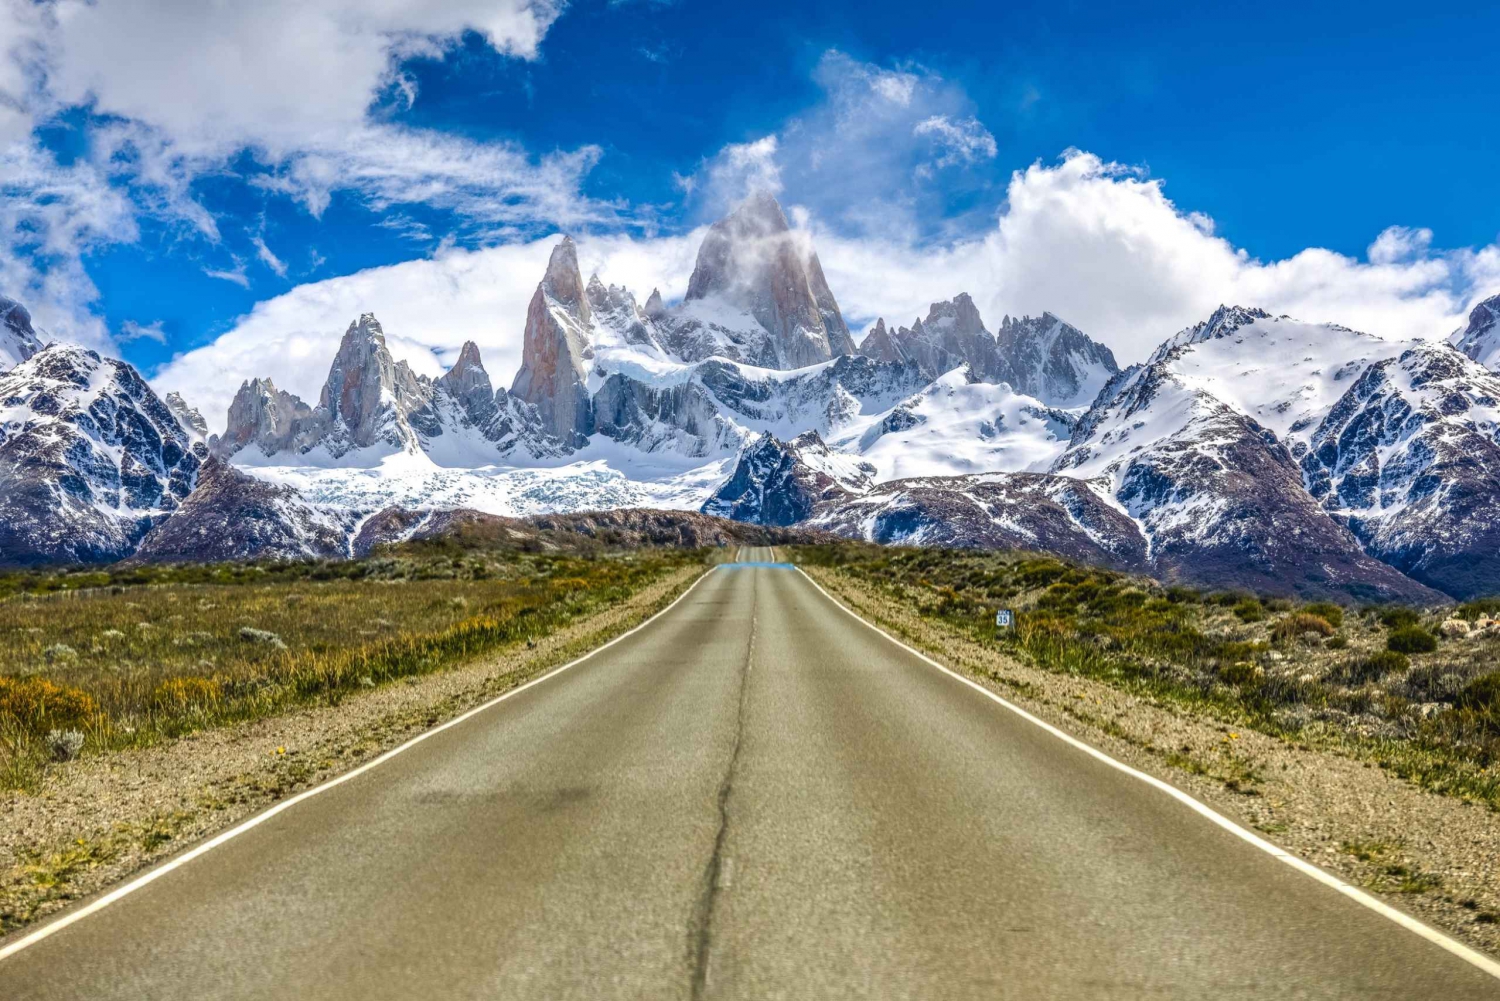 From El Calafate: Full-Day Private Transfer to El Chaltén